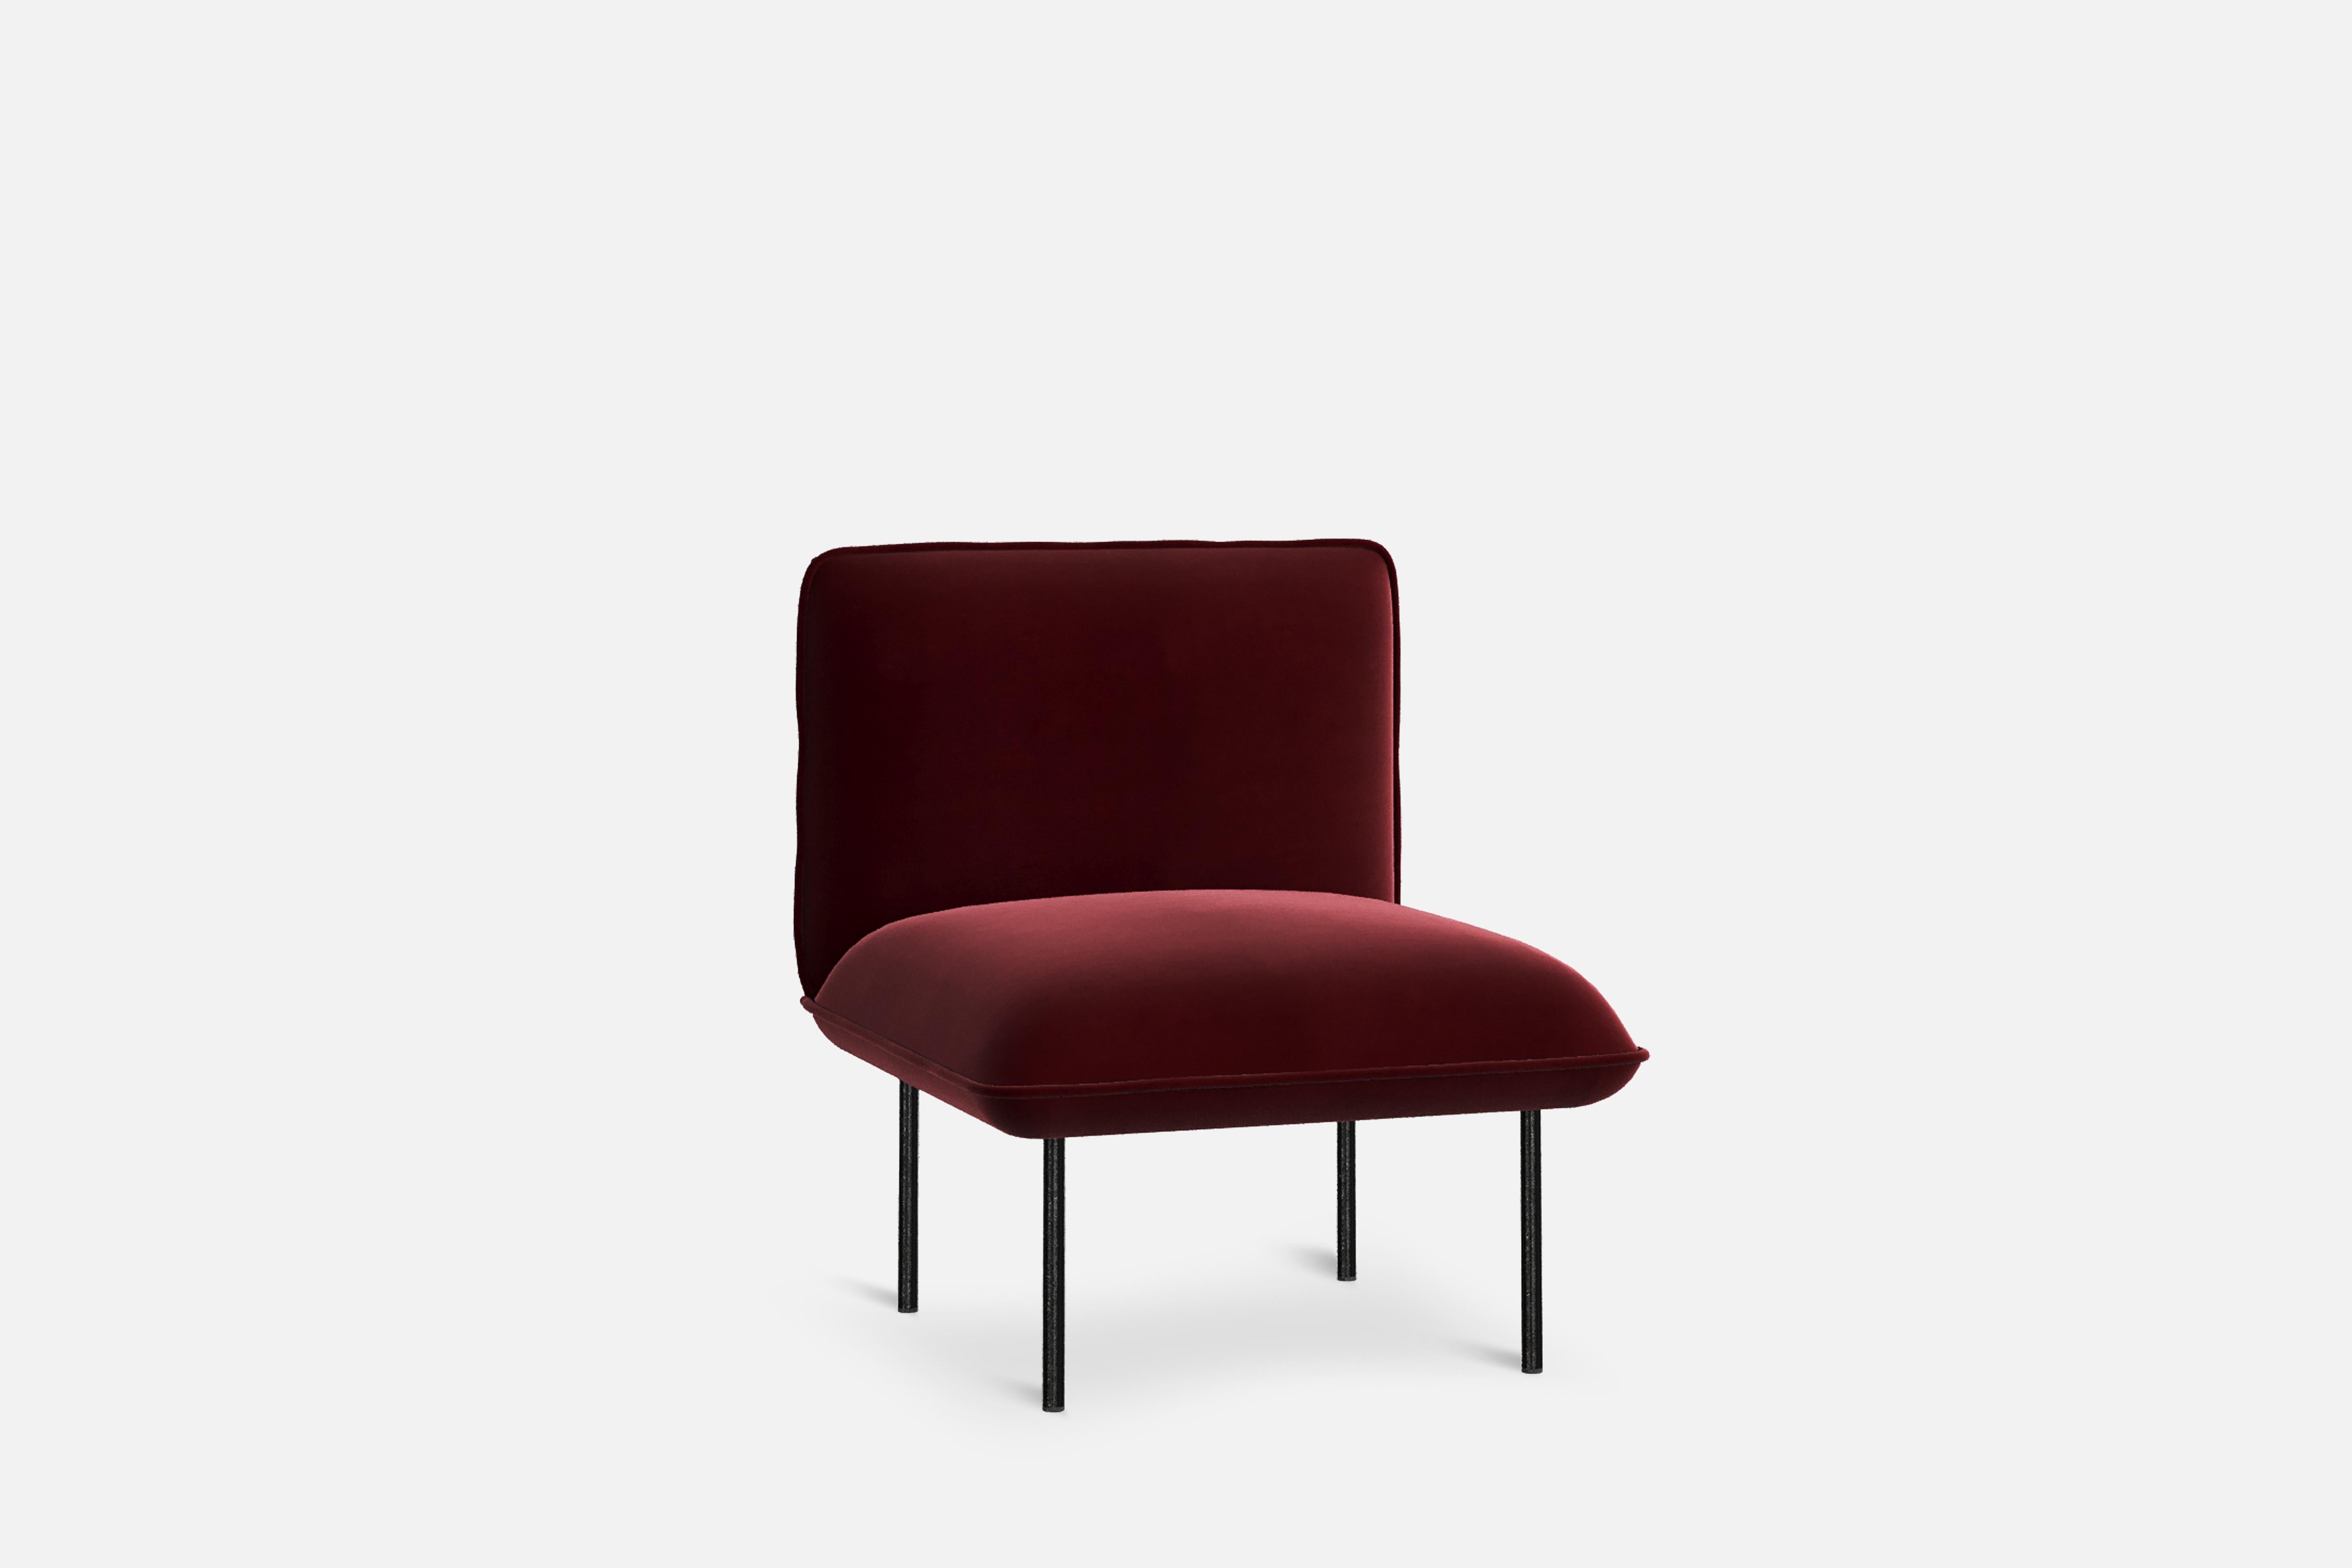 Nakki Lobby seater 1 by Mika Tolvanen.
Materials: Foam, Plywood, Elastic Belts, Memory Foam, Fabric (Harald 3).
Dimensions: D 78 x W 68 x H 82 cm.
Also available in different colours and materials. 

The founders, Mia and Torben Koed, decided